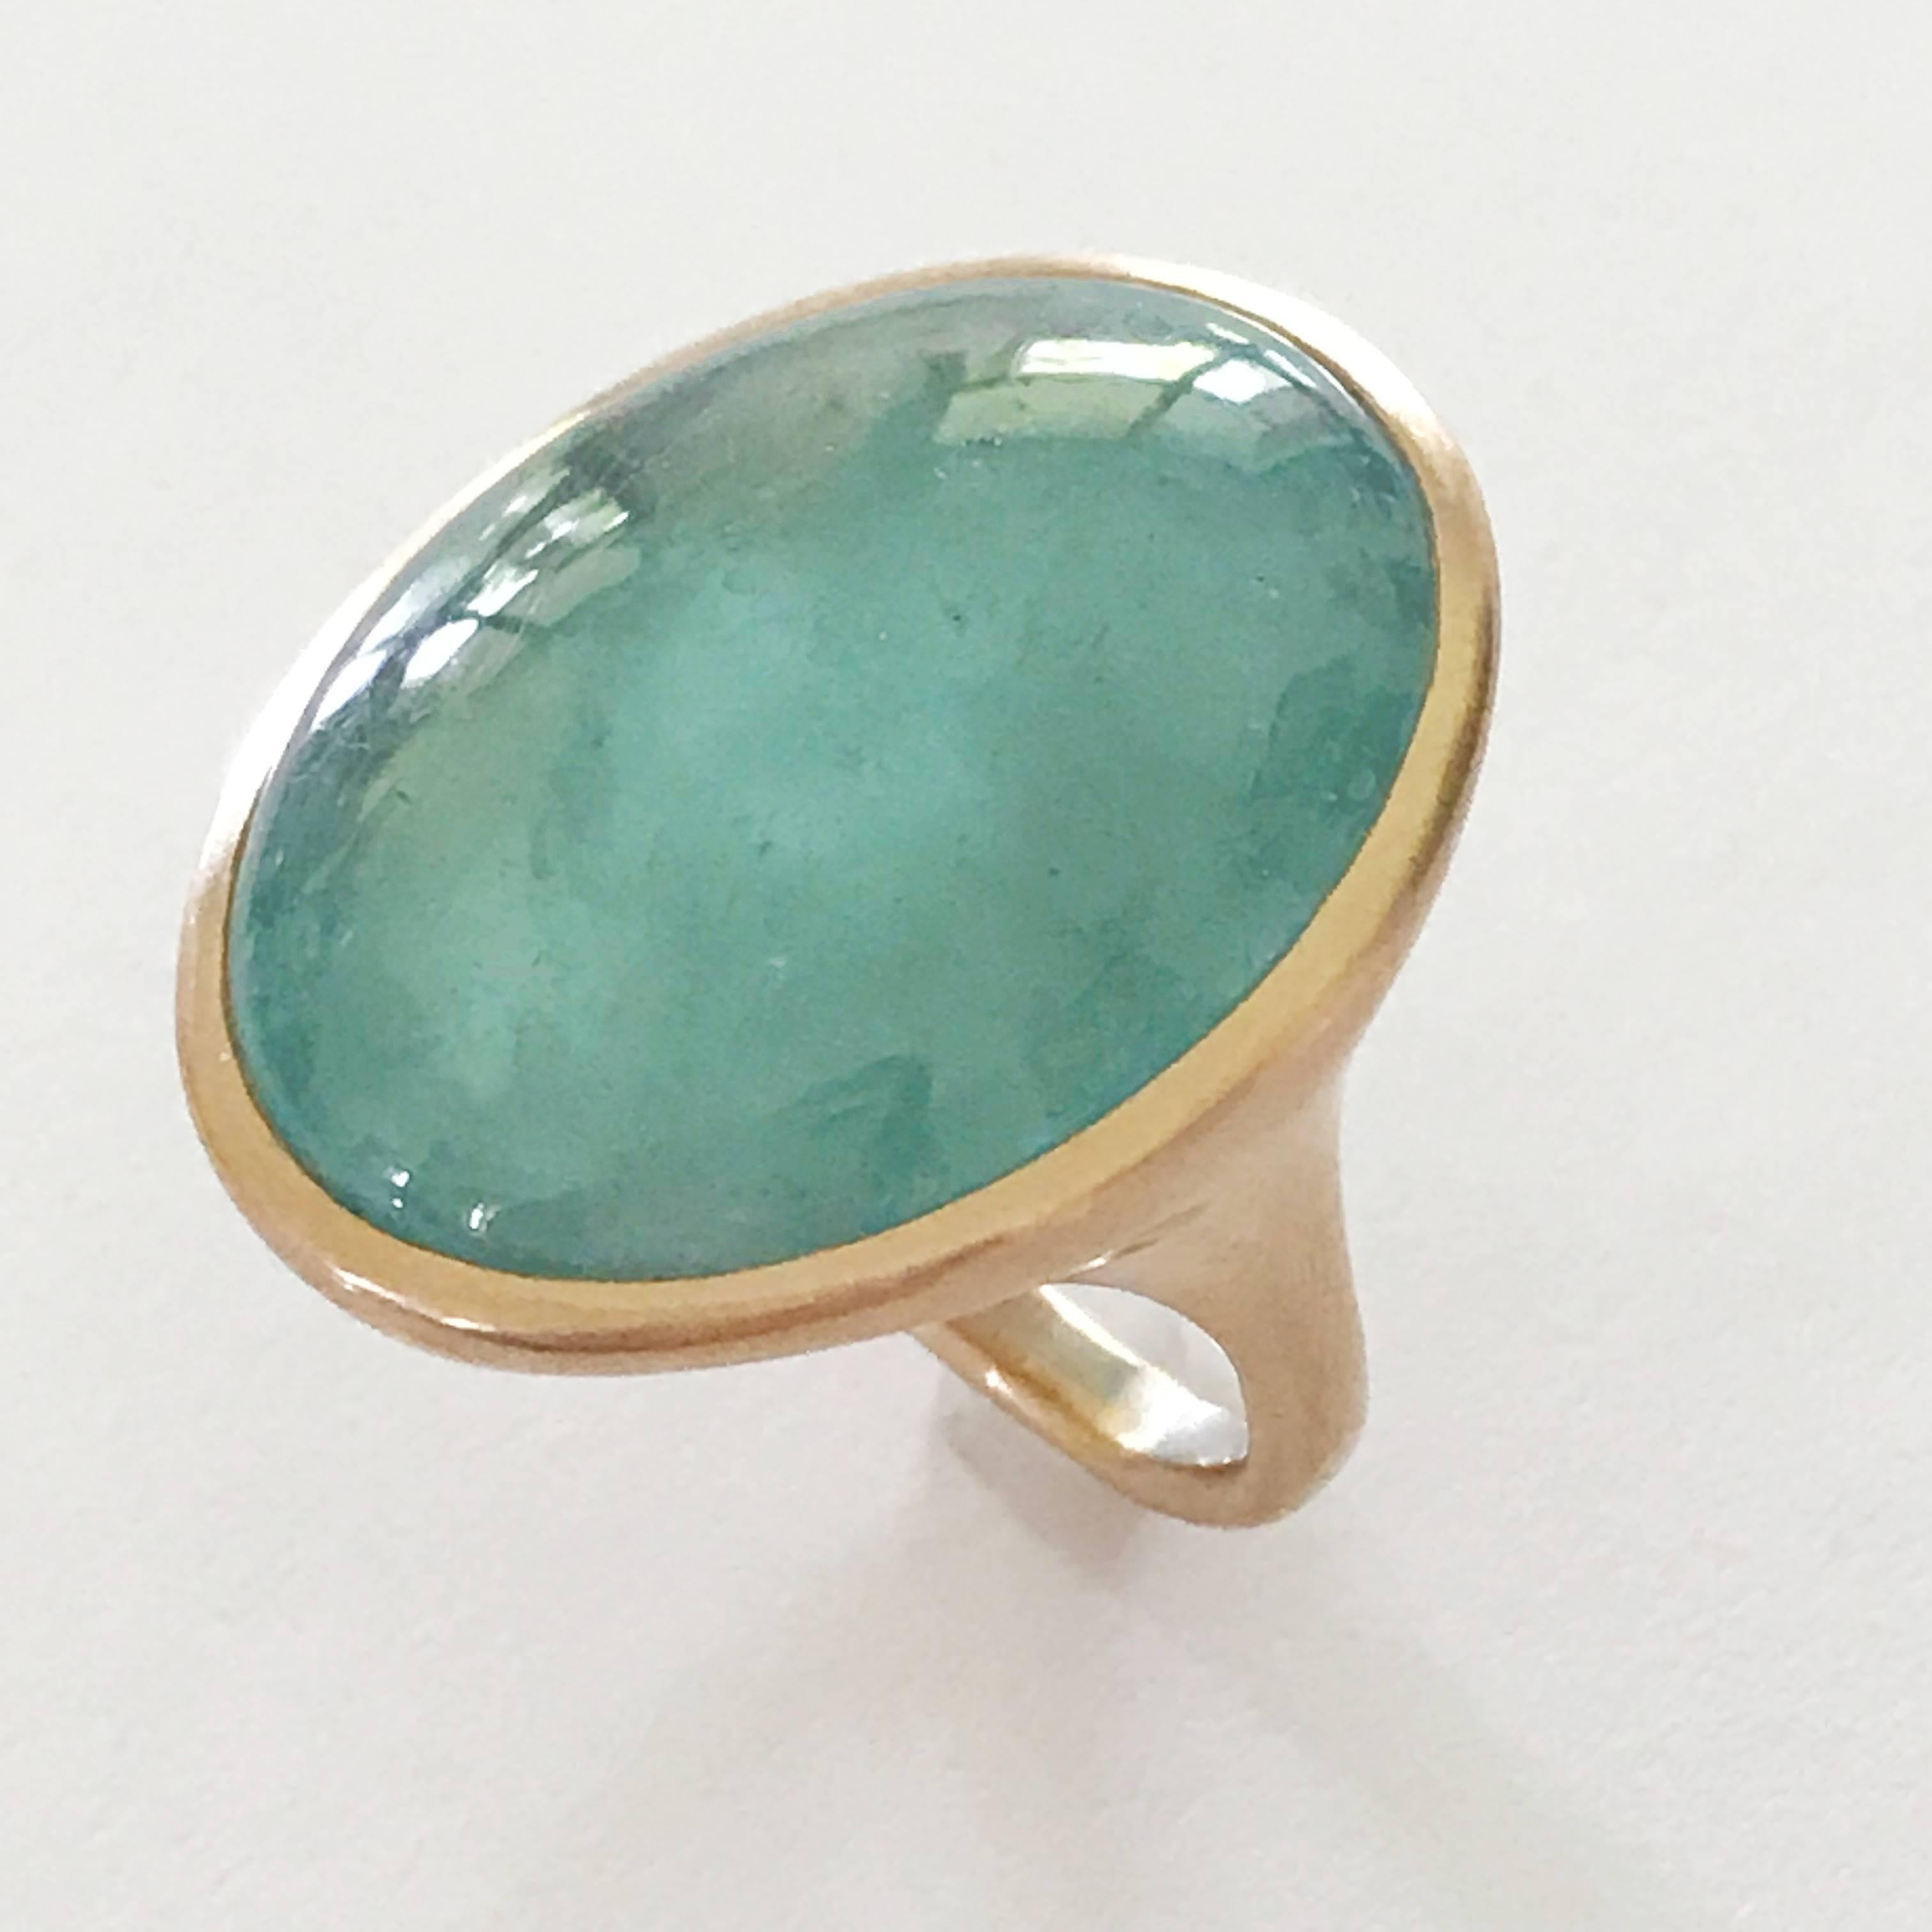 Dalben design One of a Kind 18k rose gold matte finishing ring with a 27,6 carat bezel-set oval cabochon cut Aquamarine. 
Ring size 6 3/4 - EU 54 re-sizable to most finger sizes.  
Bezel stone dimensions :  
width 22,8 mm  
height 27,1 mm  
The ring